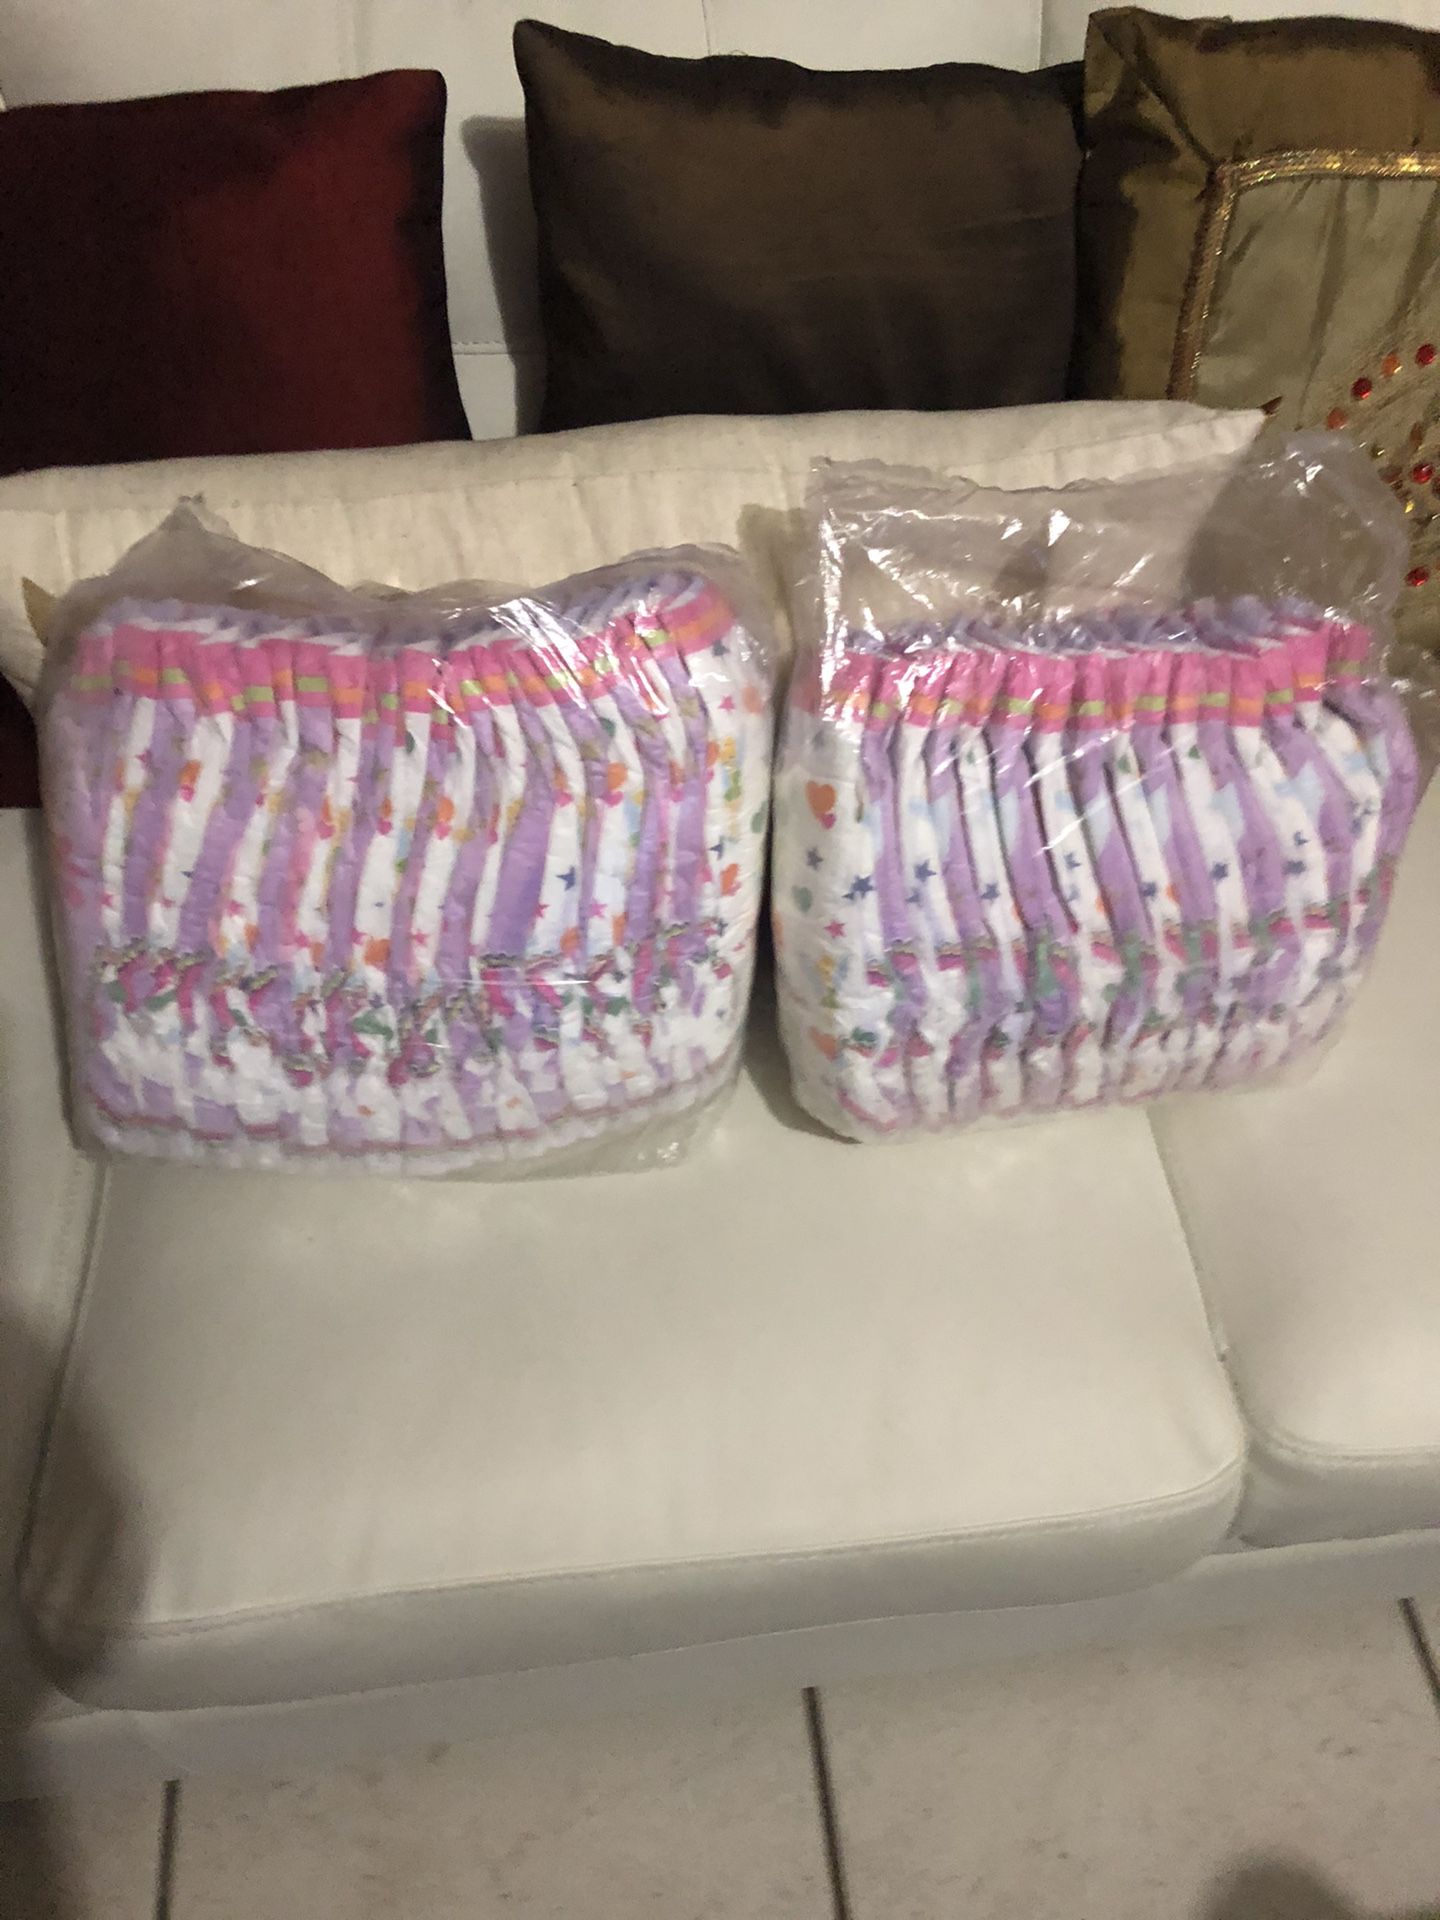 New two packs diapers one big new close 1 bag open use a couple both packs $ 8 .00 firm